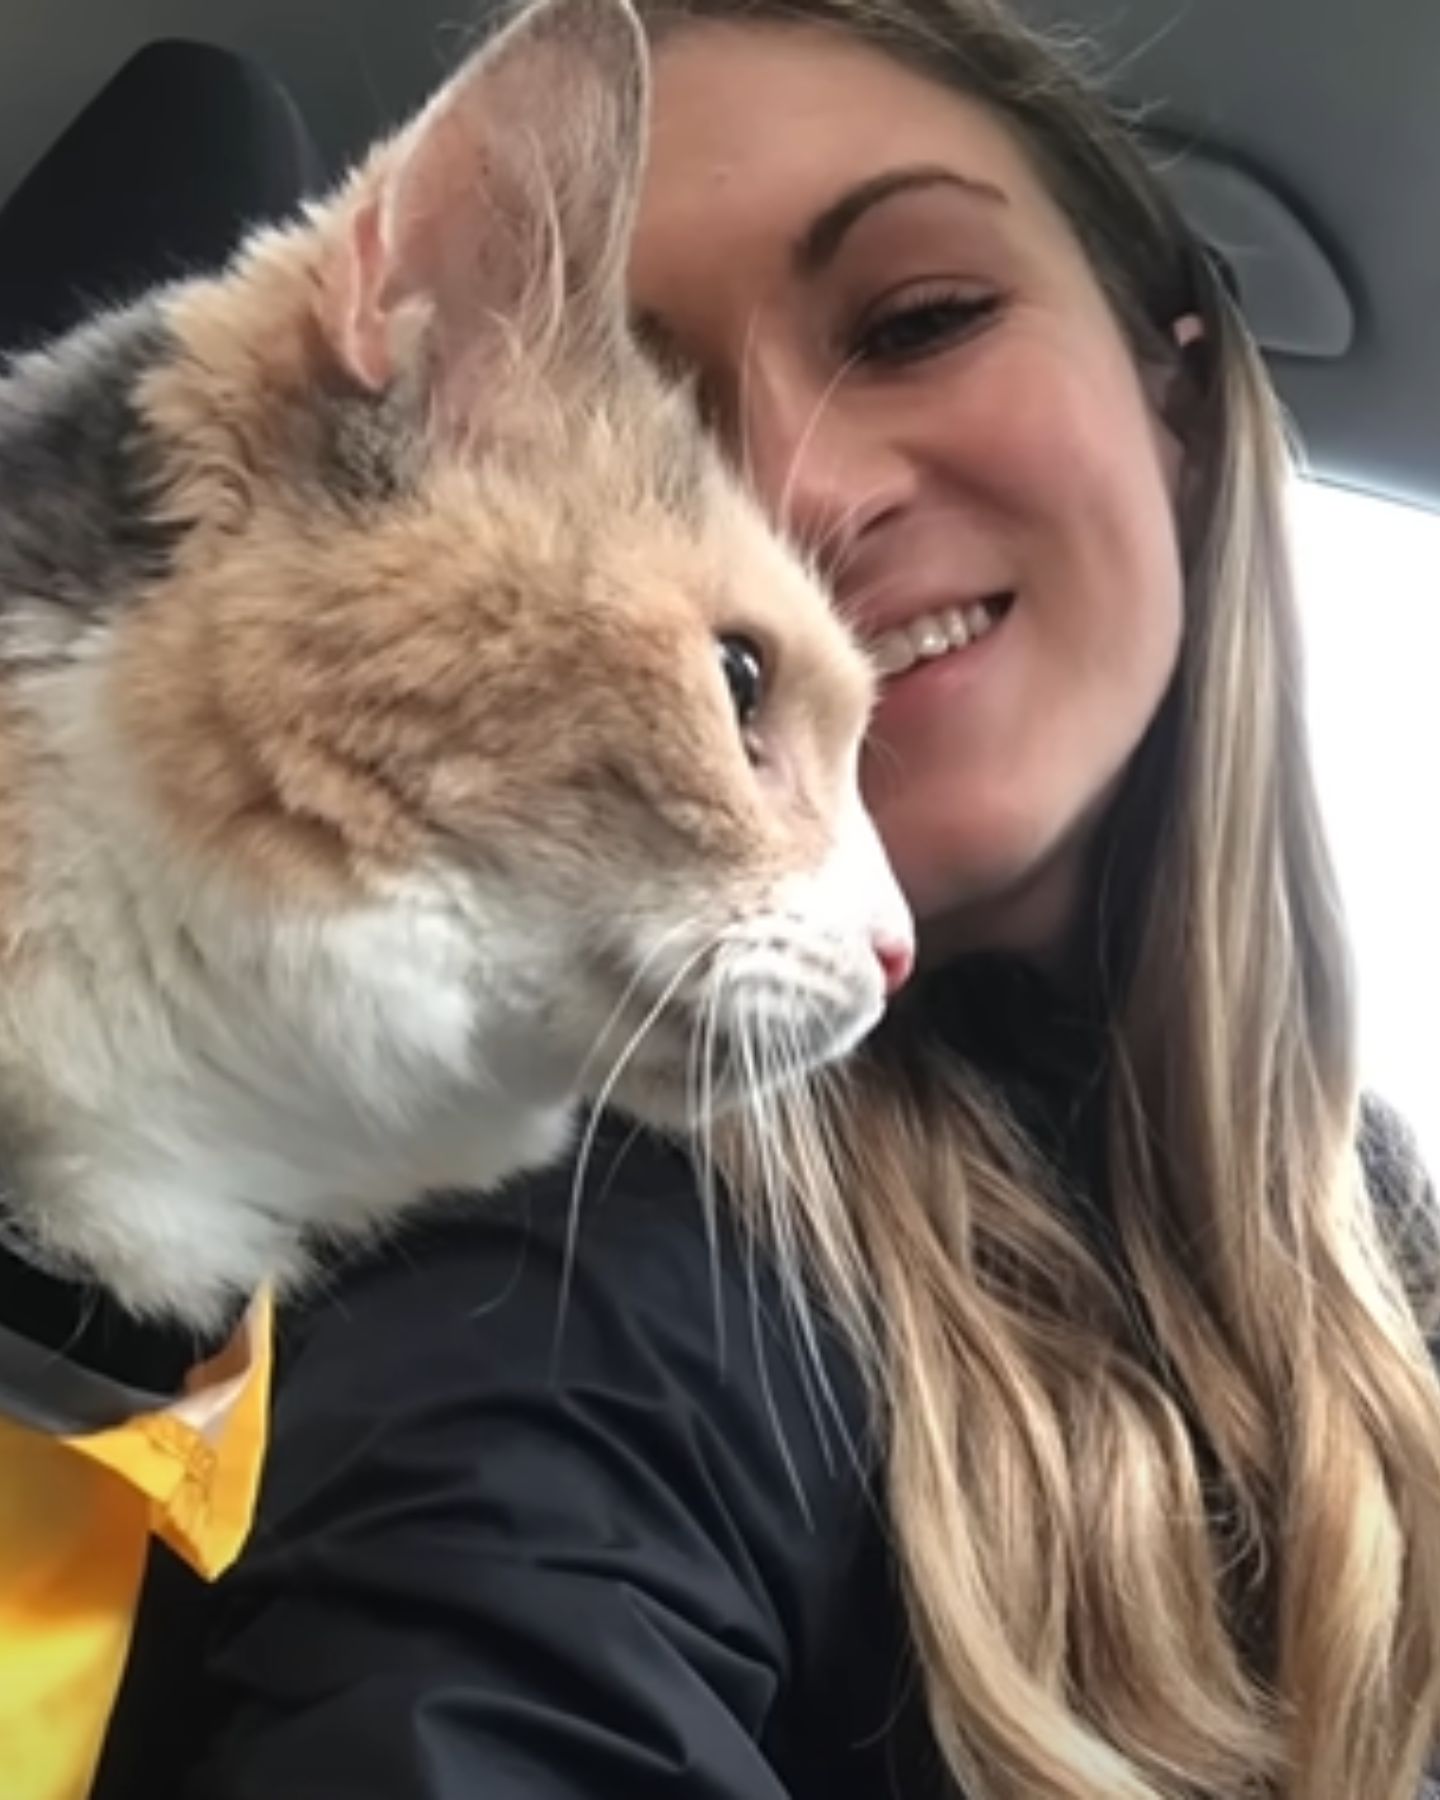 grumpy cat with her owner in the car